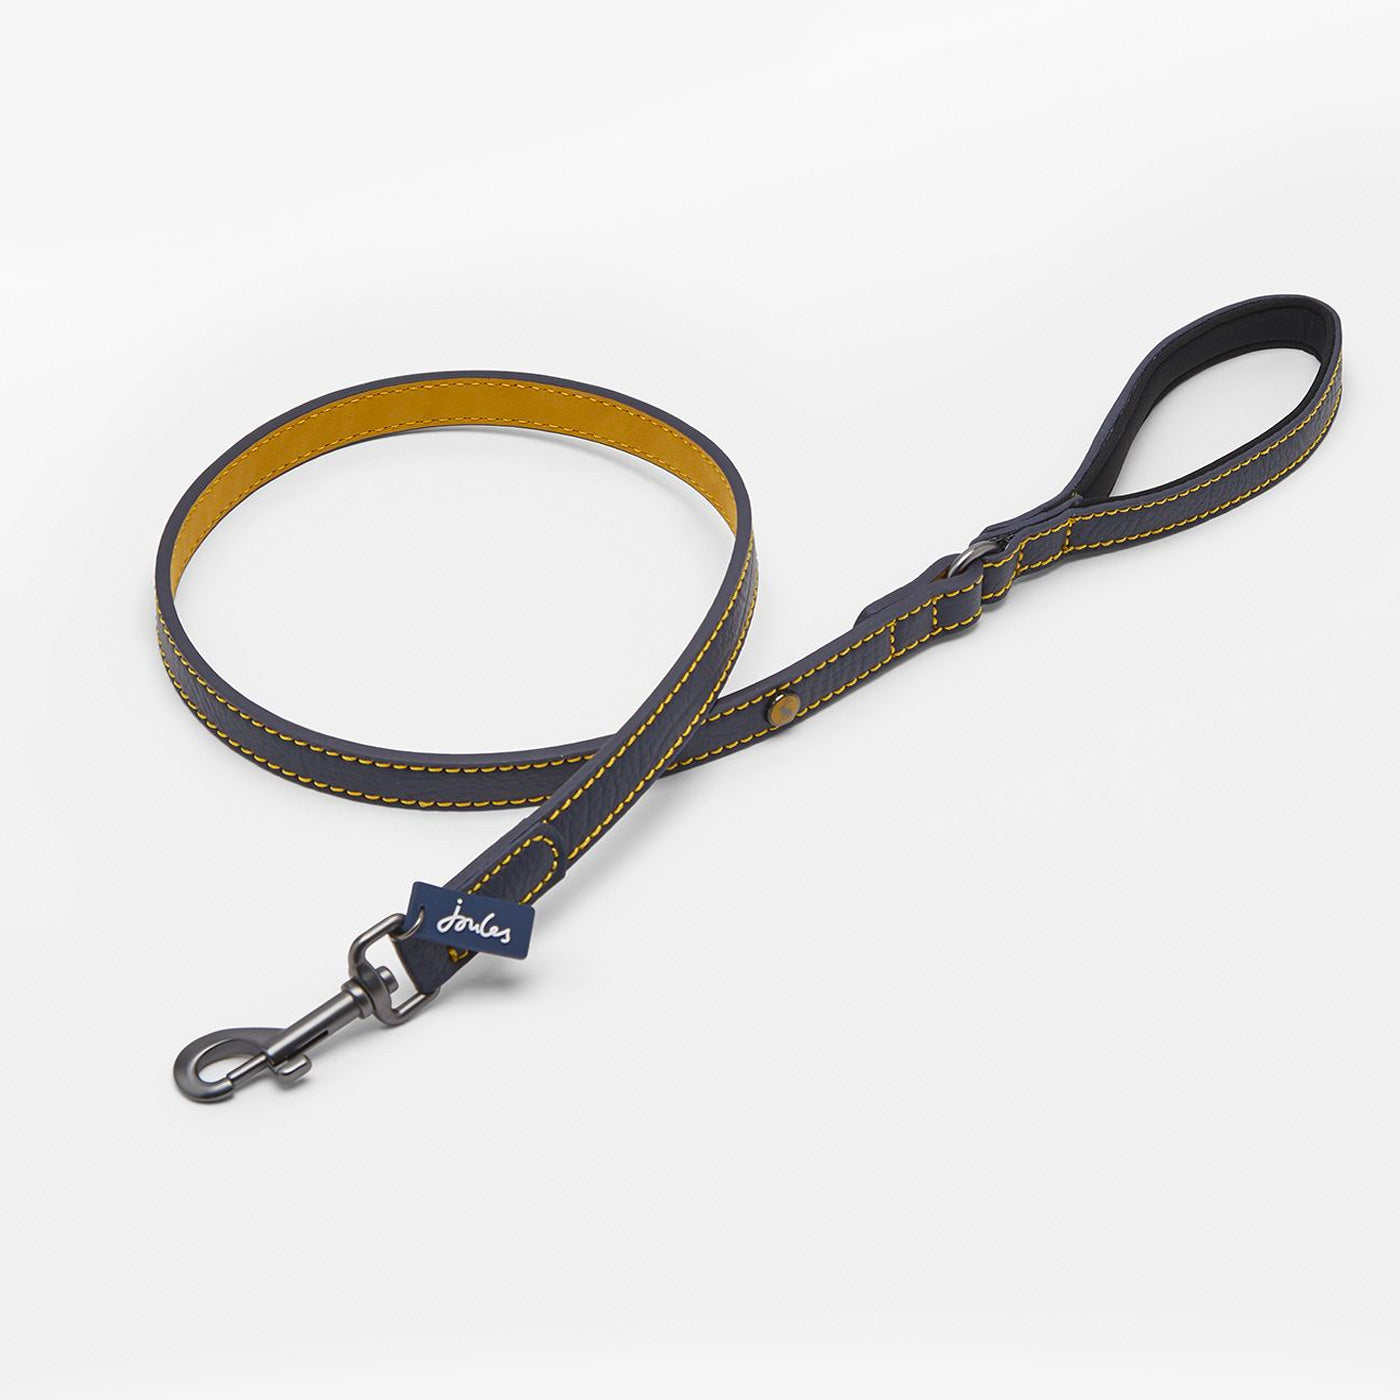 Joules navy leather dog lead full studio